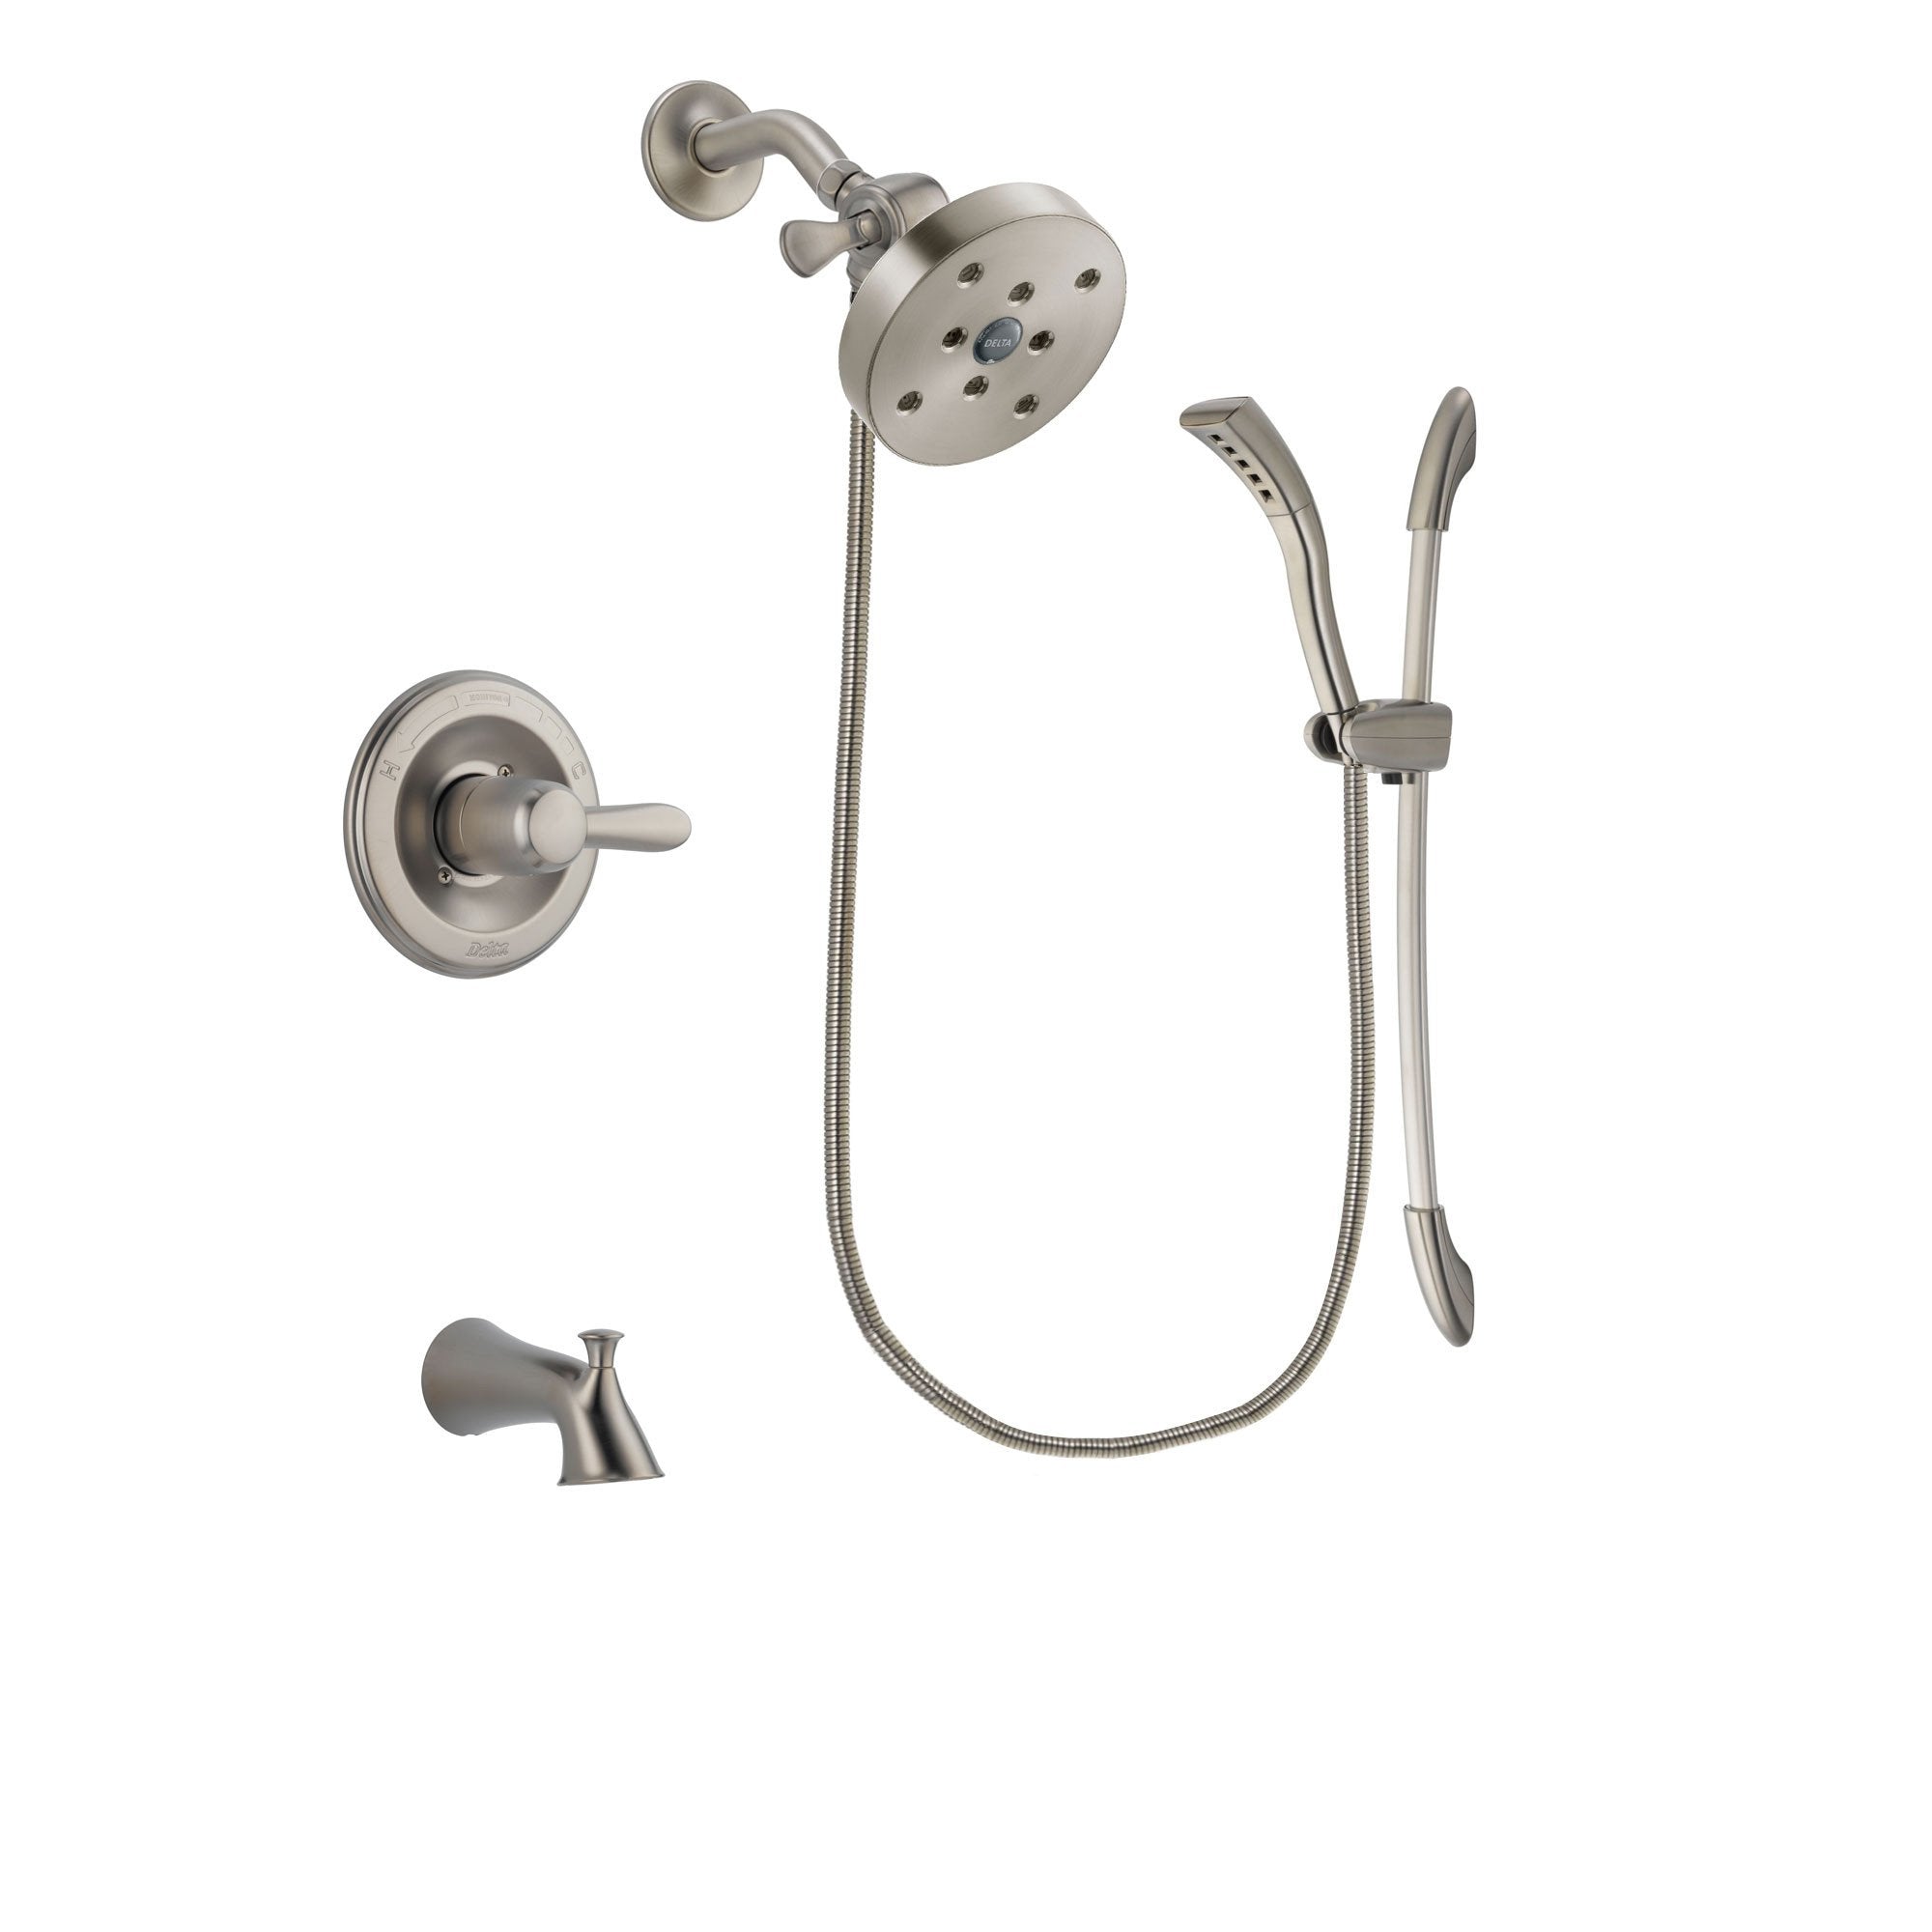 Delta Lahara Stainless Steel Finish Tub and Shower Faucet System Package with 5-1/2 inch Shower Head and Handshower with Slide Bar Includes Rough-in Valve and Tub Spout DSP1489V